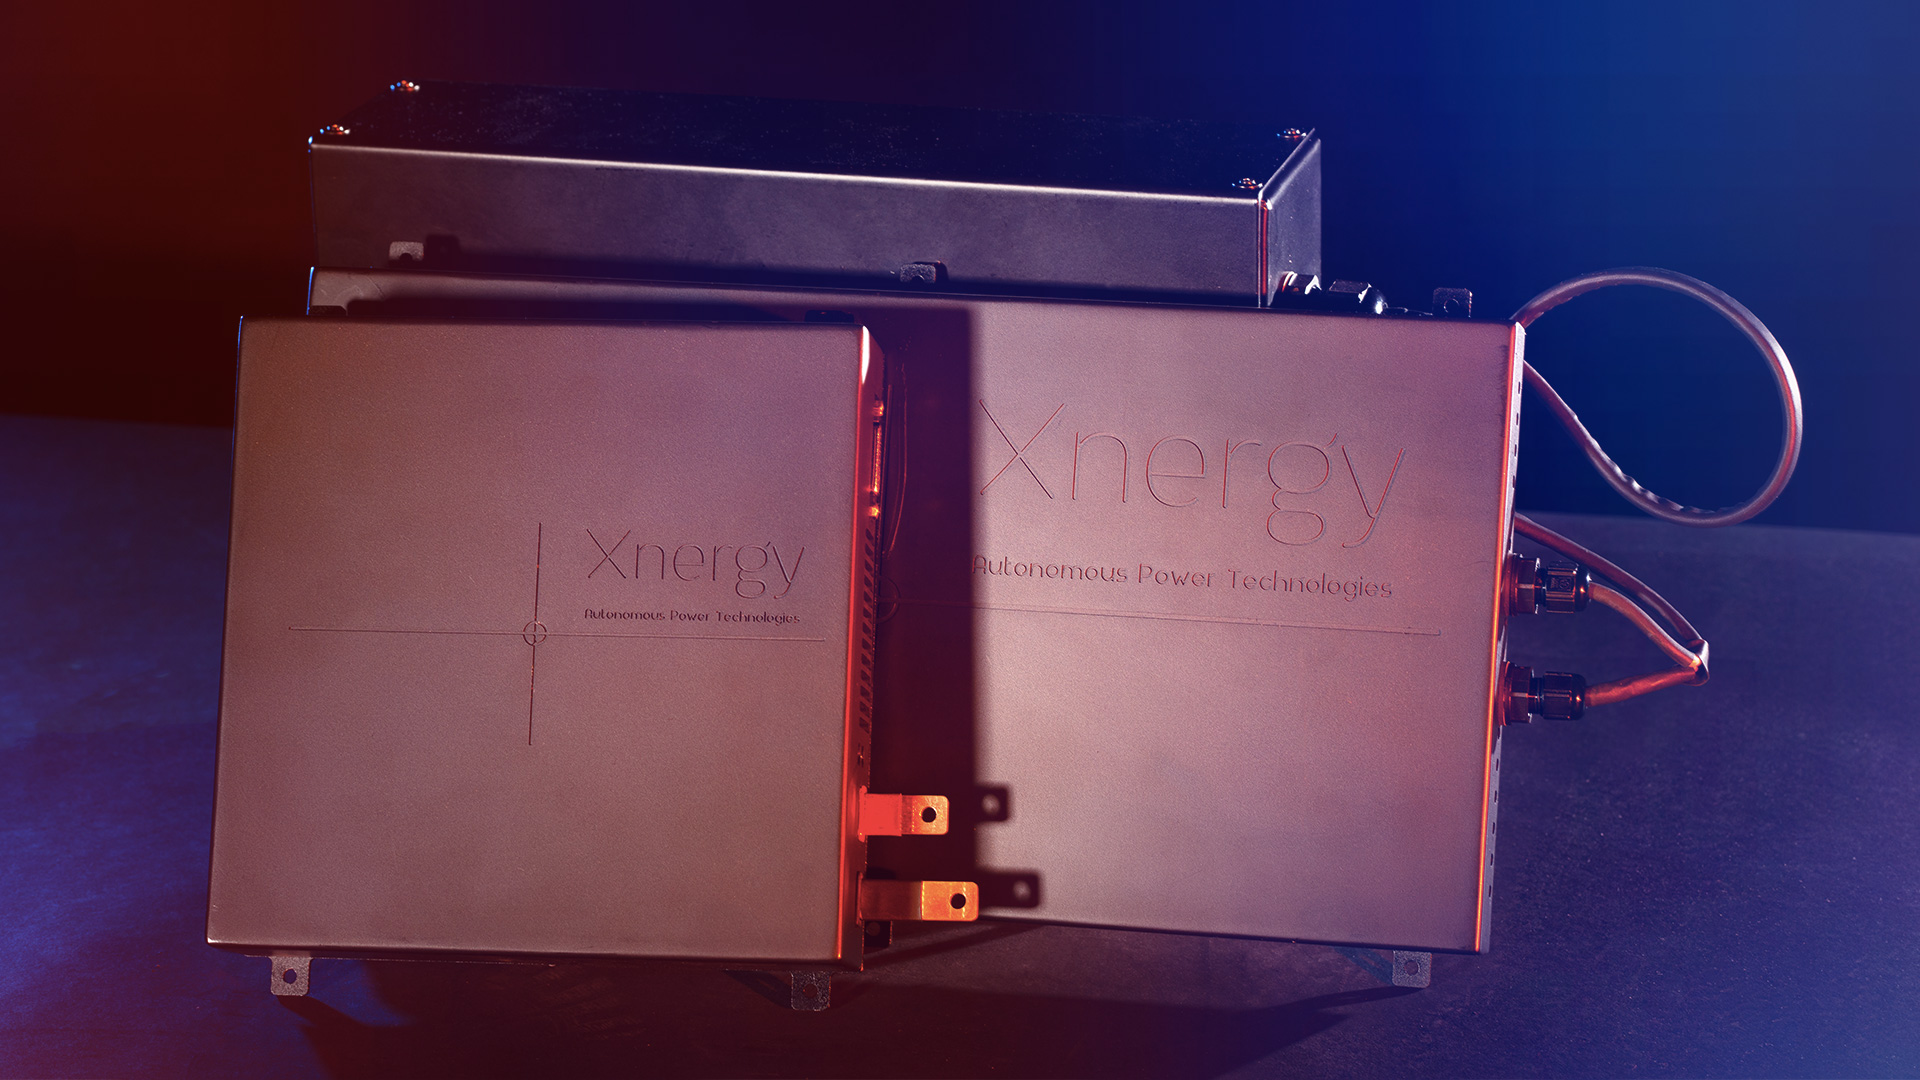 Xnergy provides high-power contactless wireless charging, unlocking the full potential of all autonomous electrified mobility by offering deployment-ready systems and setting the foundations of an industry ecosystem through strategic partnerships.